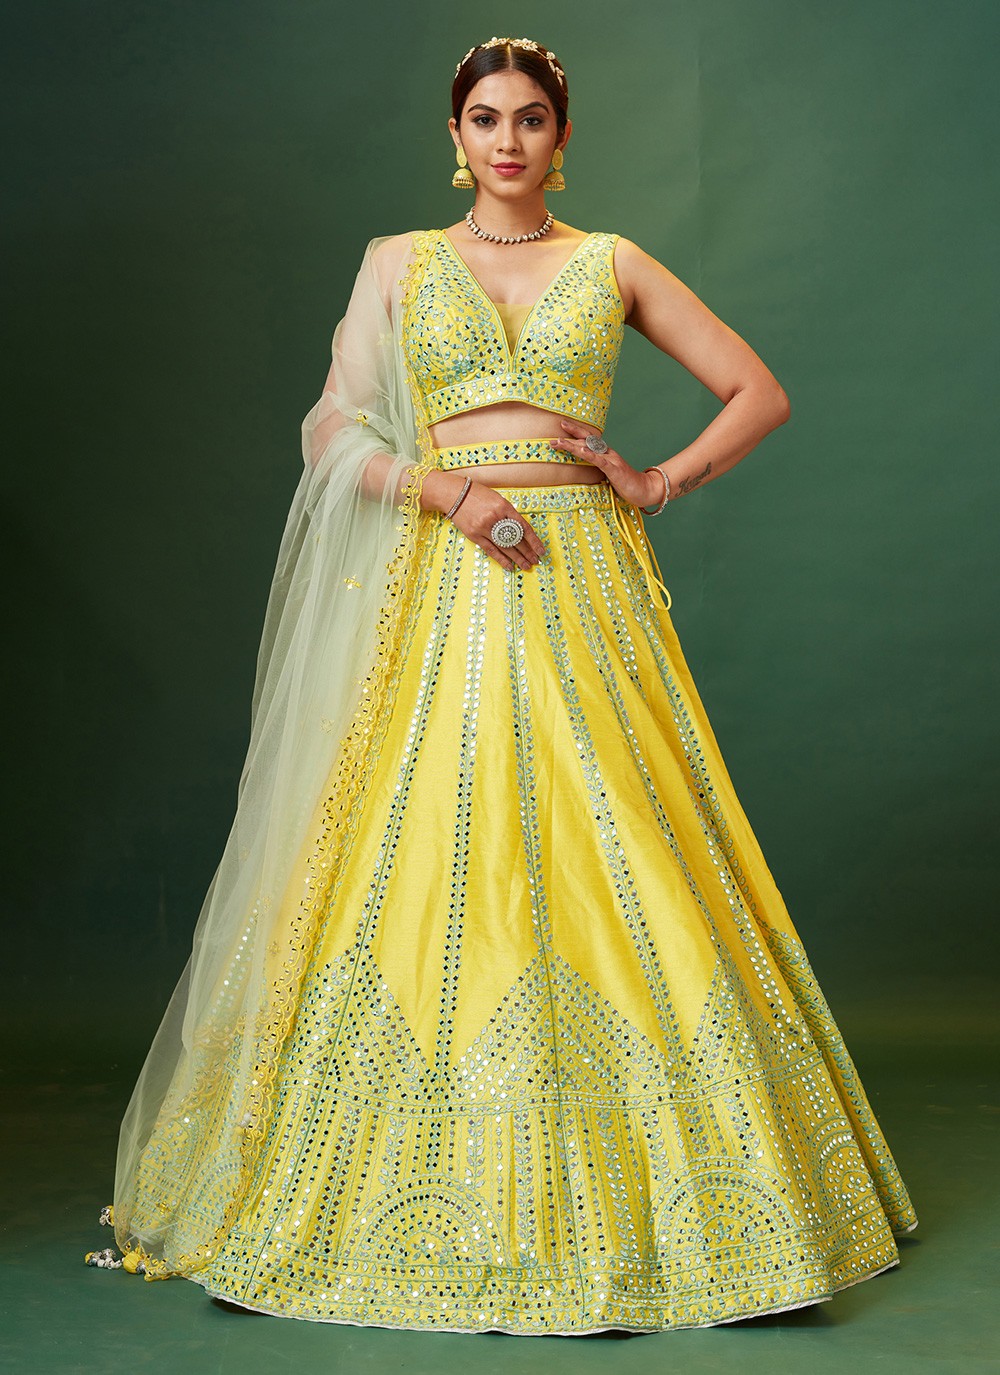 Latest Yellow Bridal Lehengas for 2022-23 Brides | Bridal outfits, Bridal,  Wedding outfit